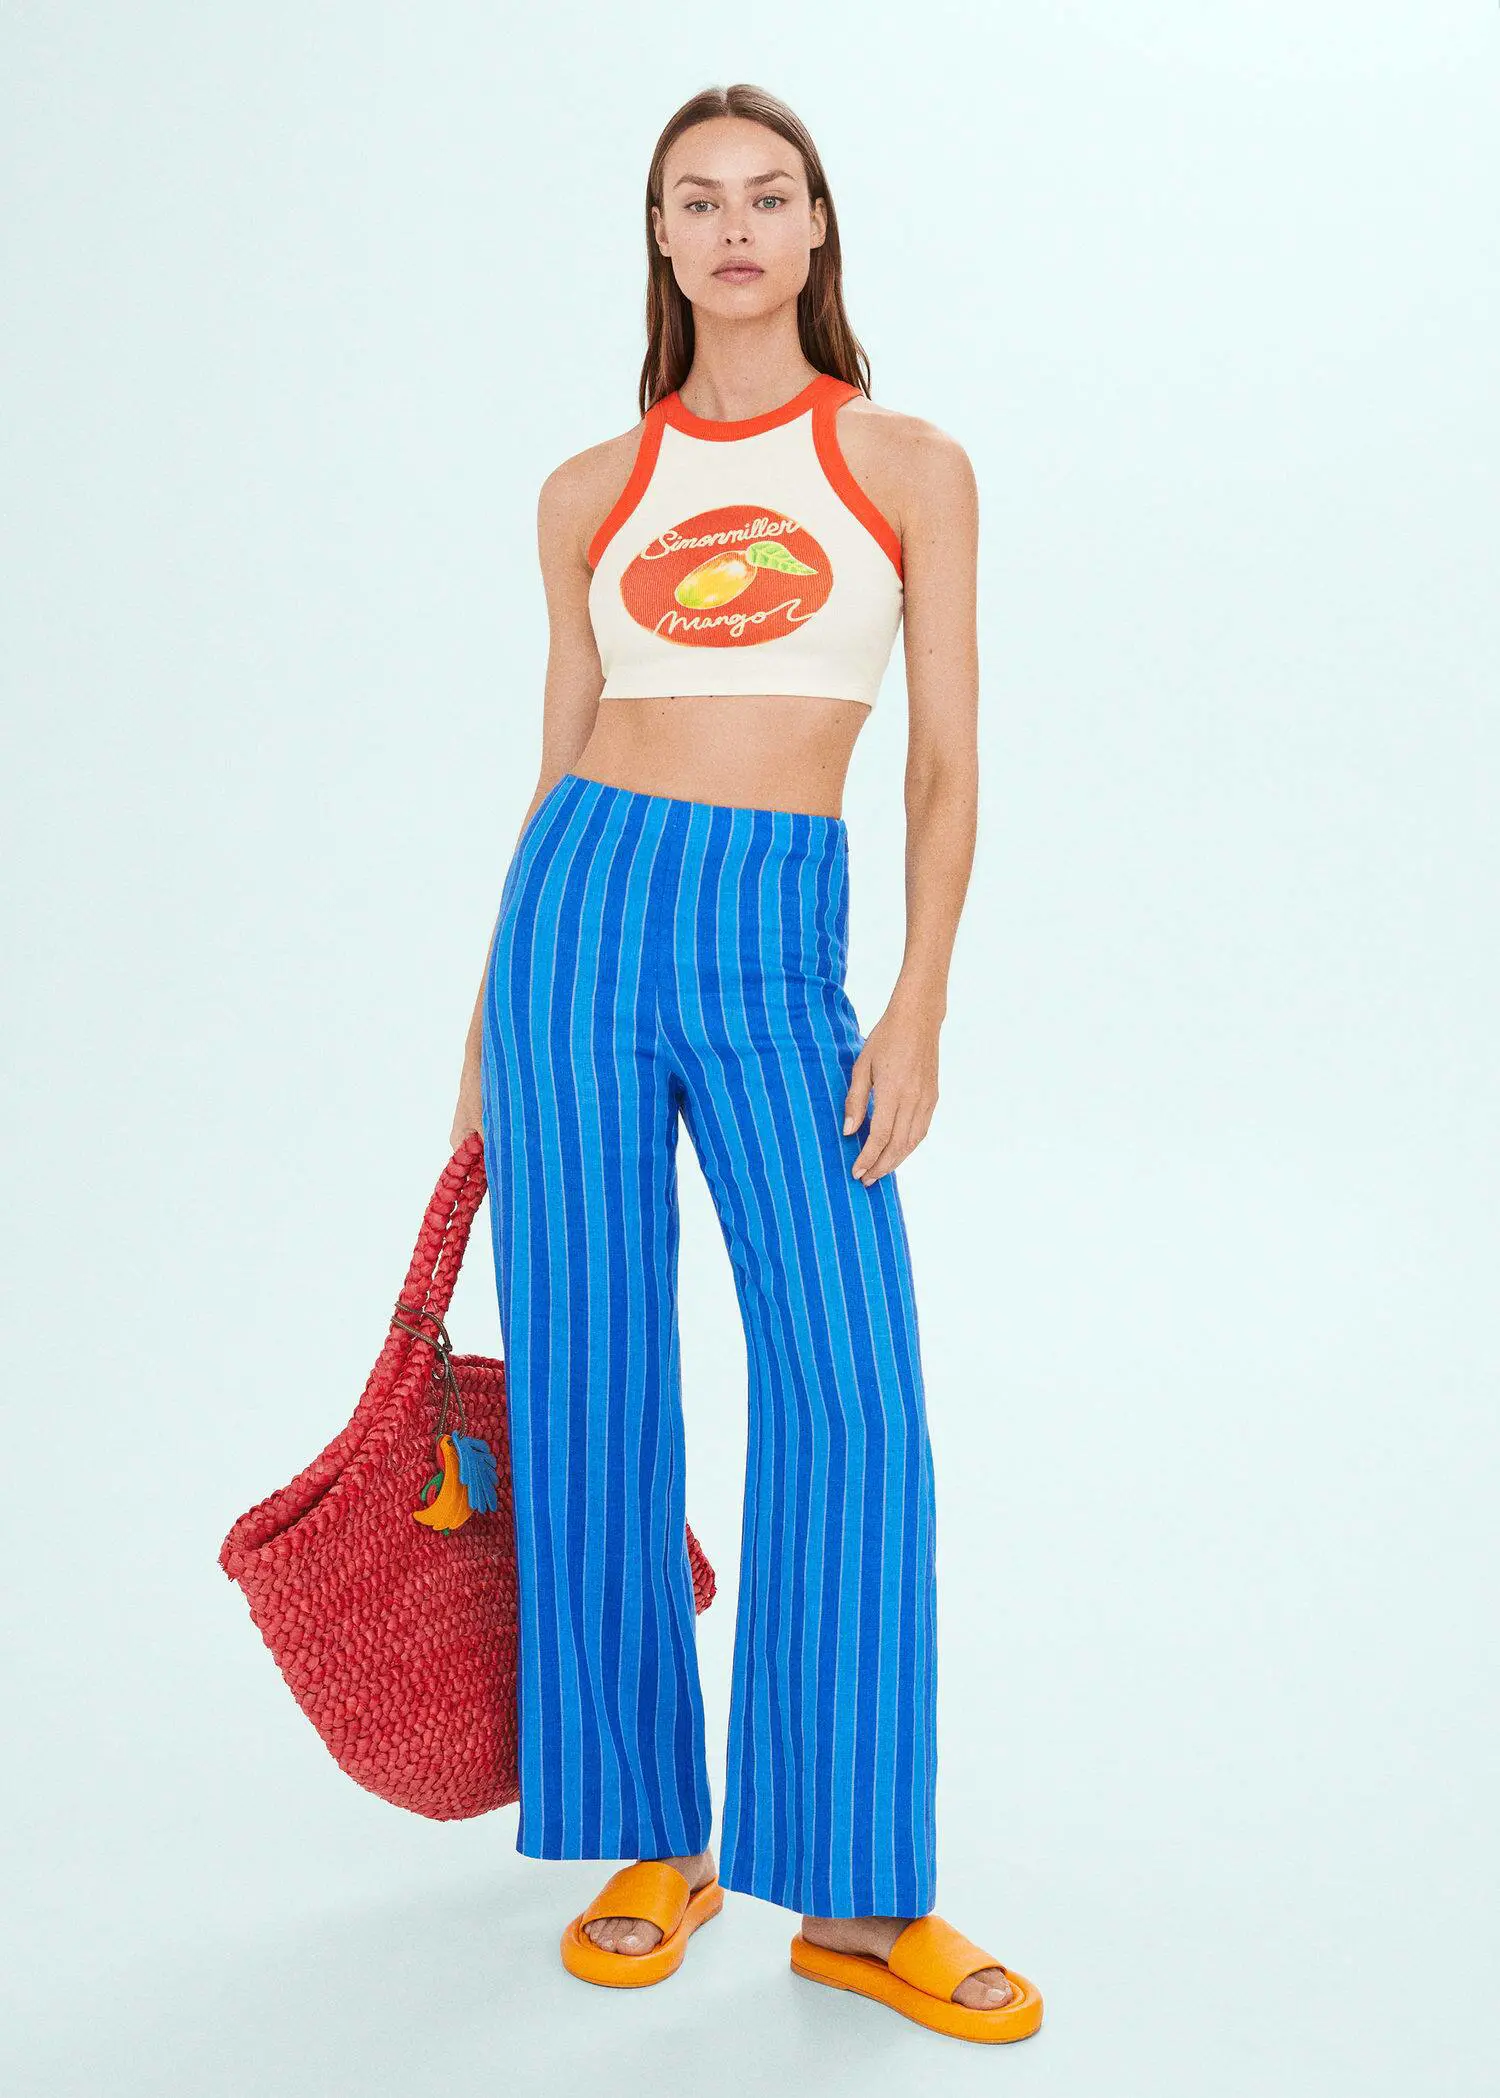 Mango Printed halter-neck cropped top. a woman in a white crop top holding a red bag. 